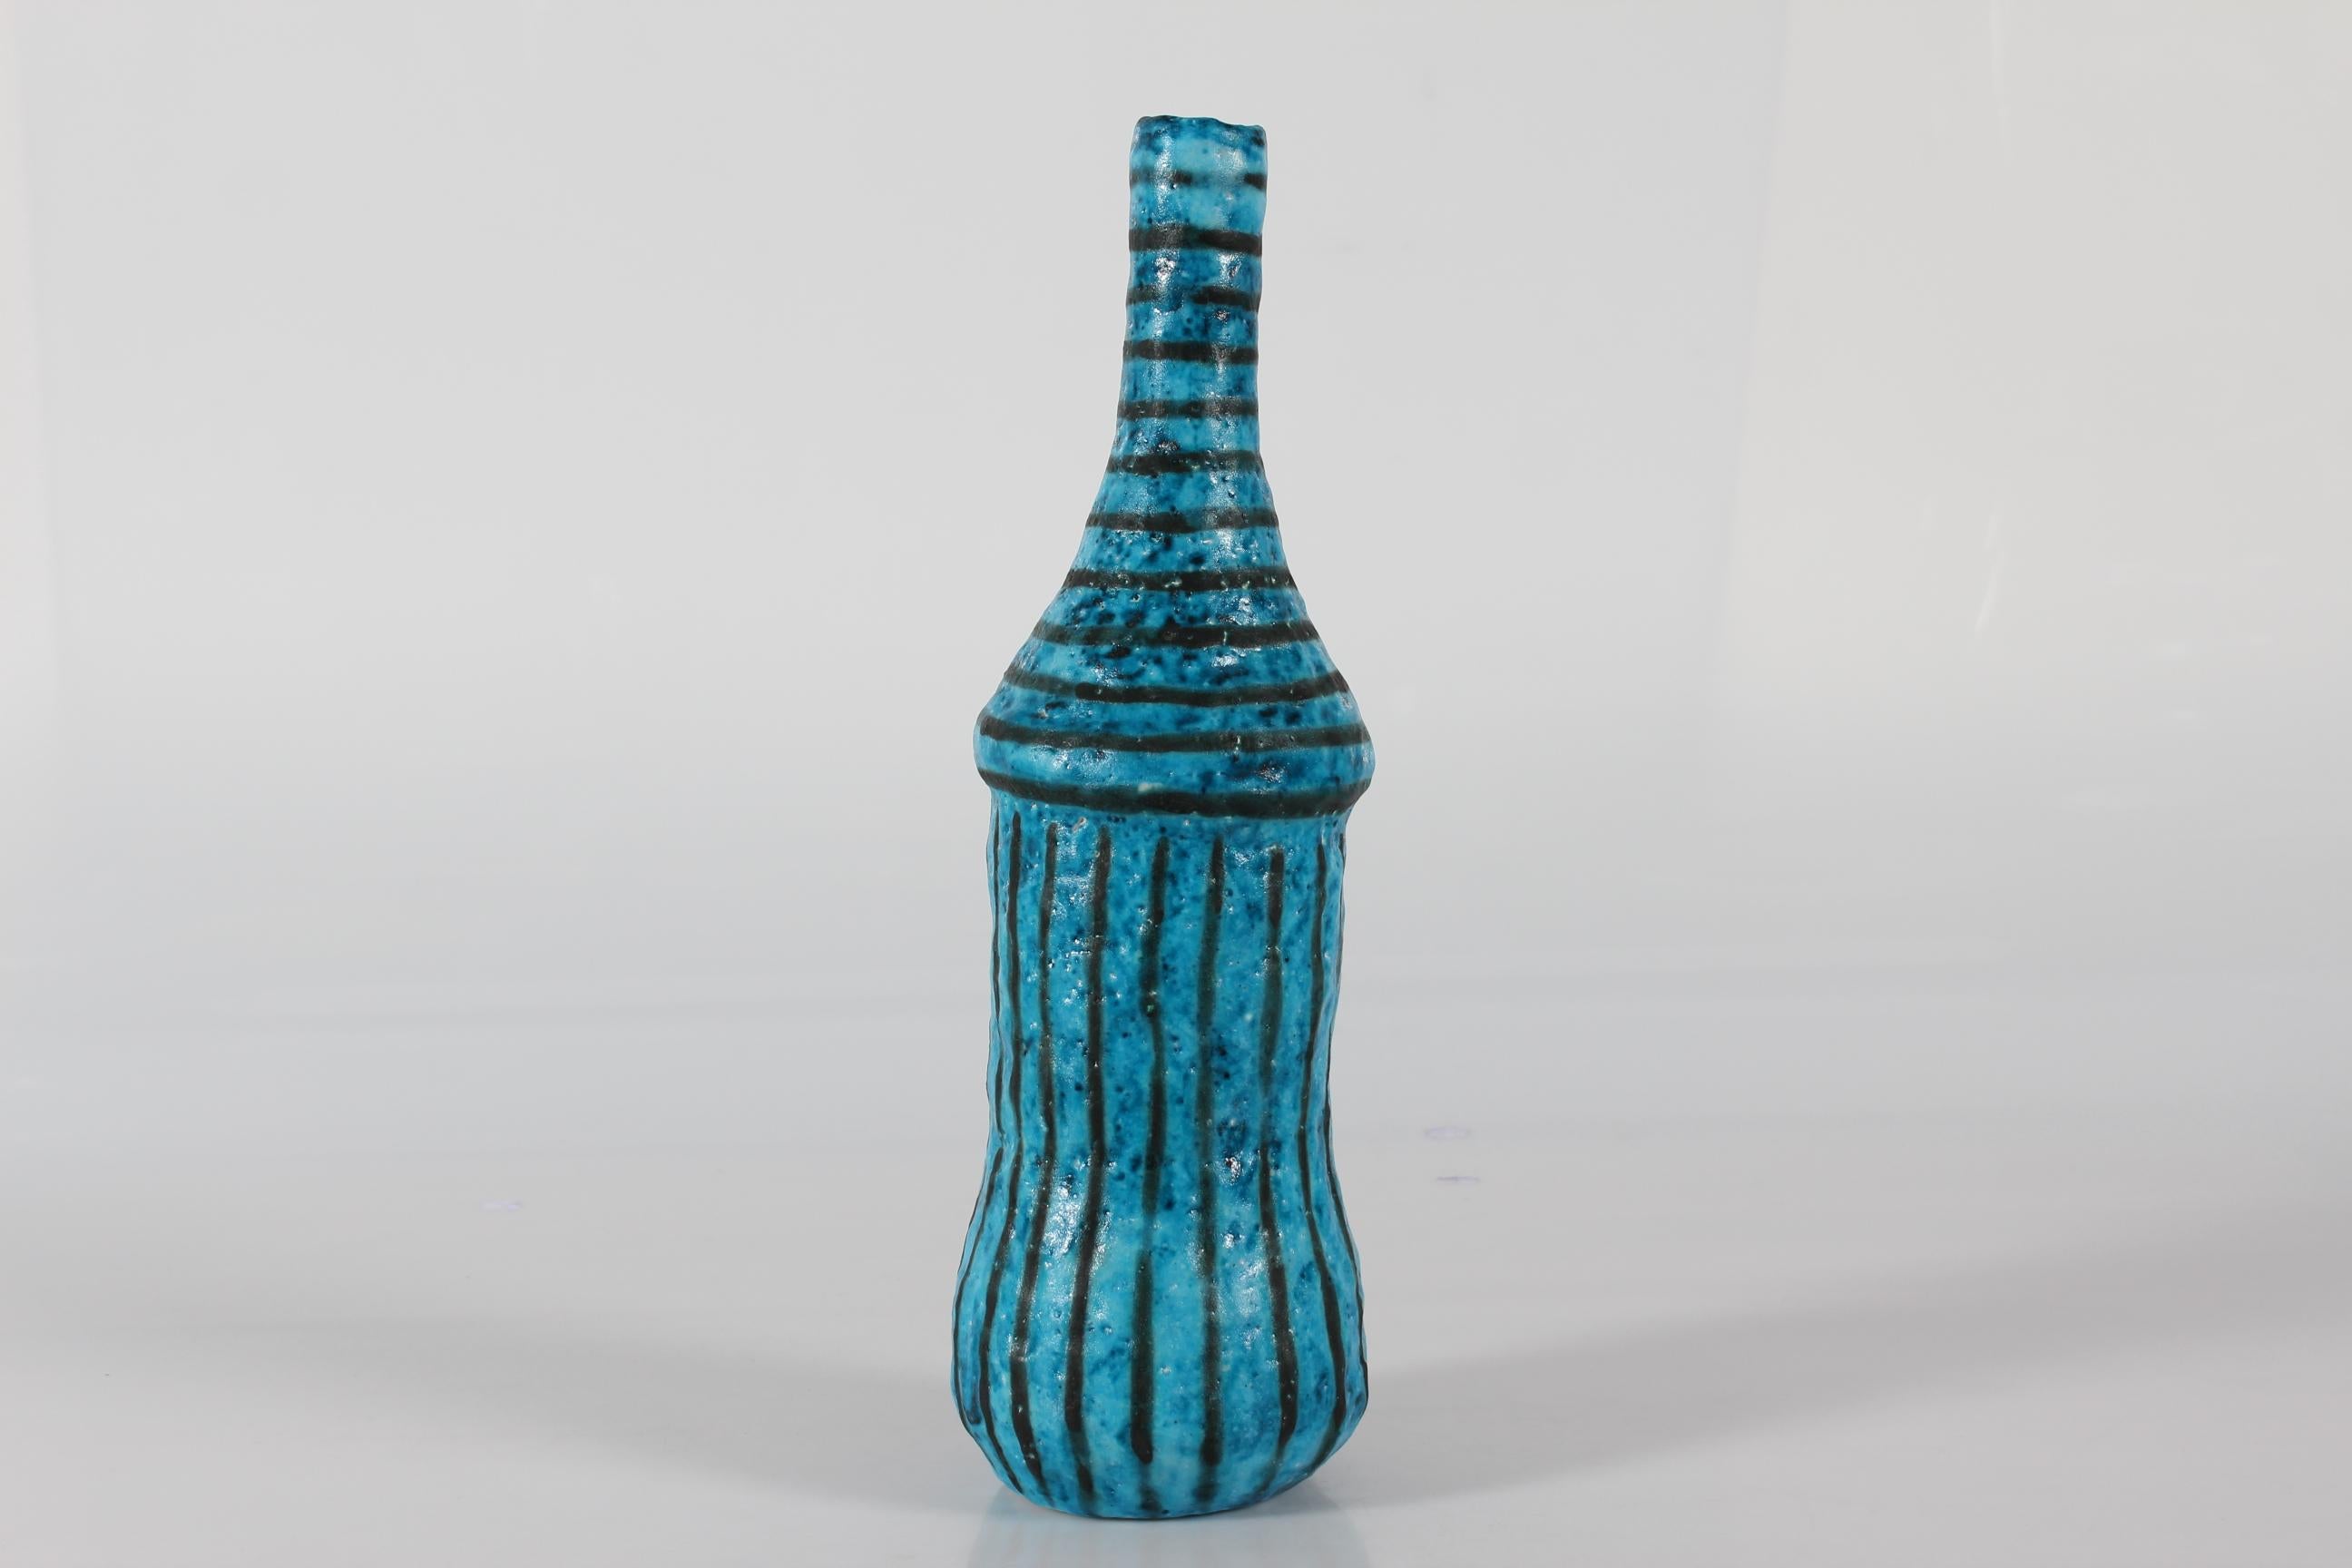 Mid-Century Modern Guido Gambone Tall Artistic Bottle Vase Blue + Black Stripes Made in Italy 1950s For Sale